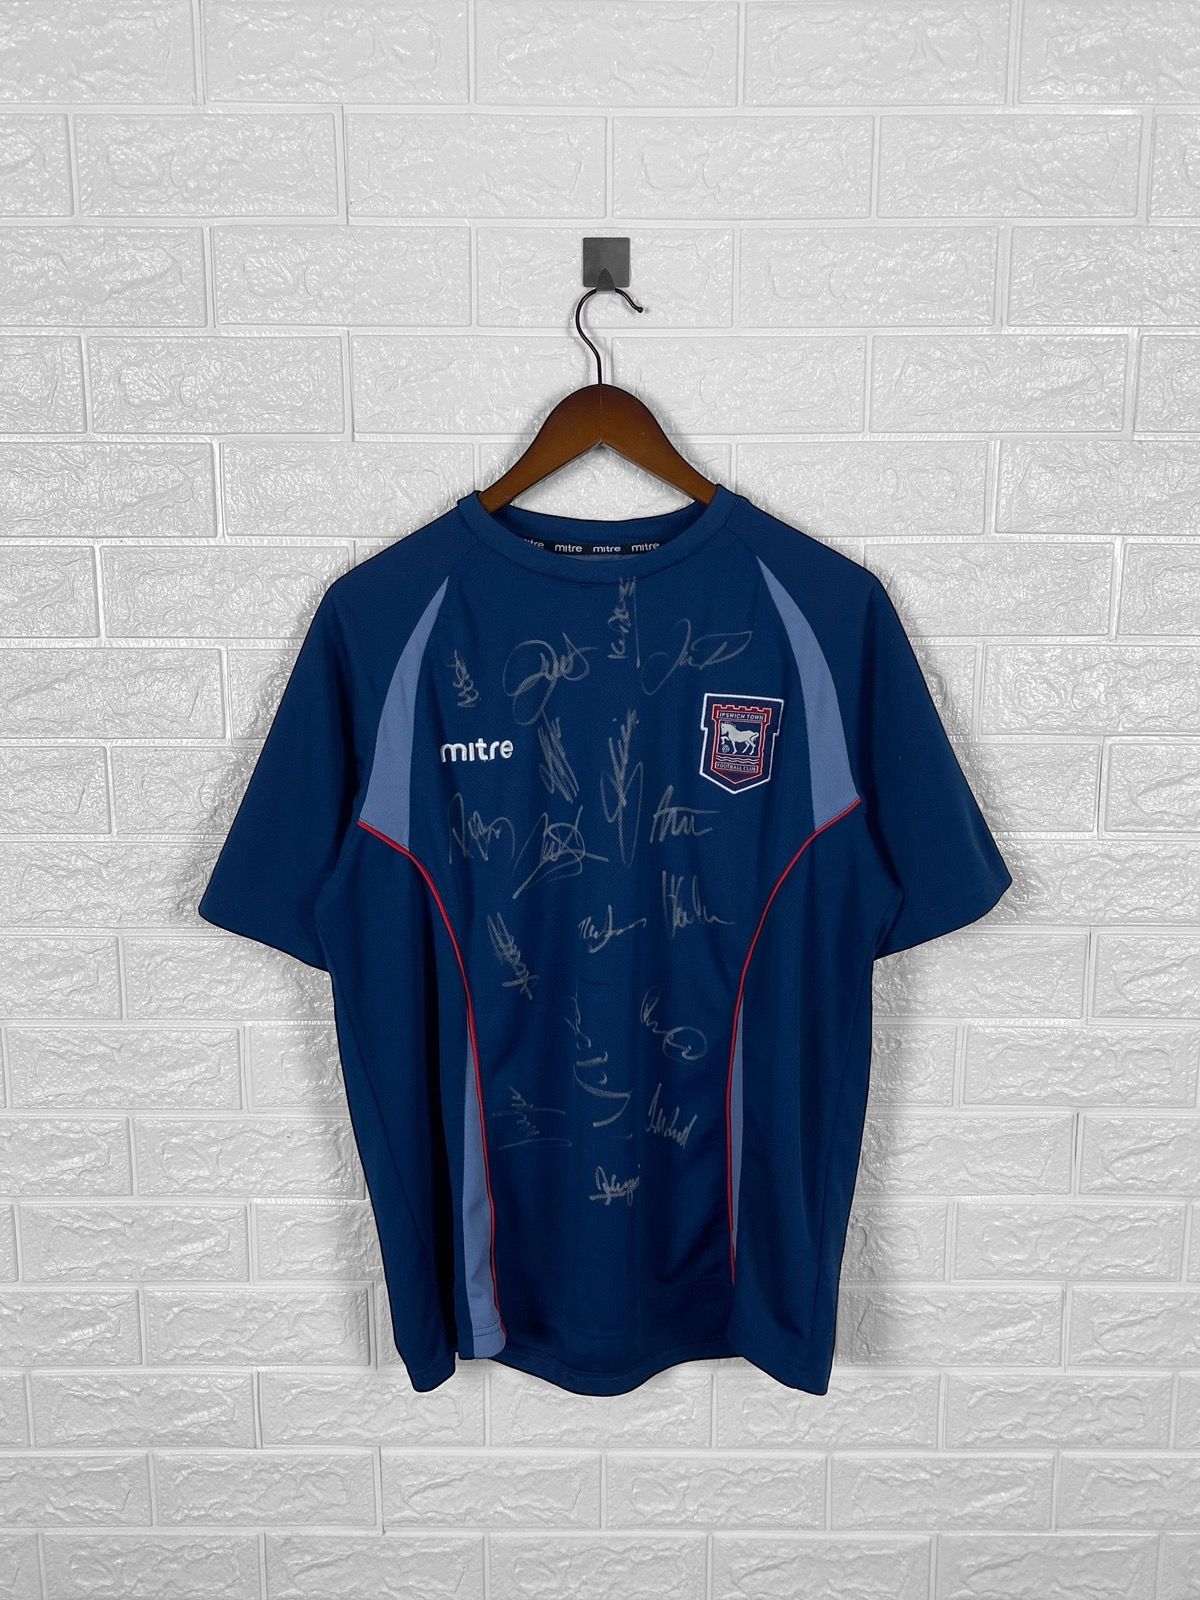 Pre-owned Jersey X Soccer Jersey Vintage Mitre Ipswich Town Soccer Jersey With Autographs In Blue